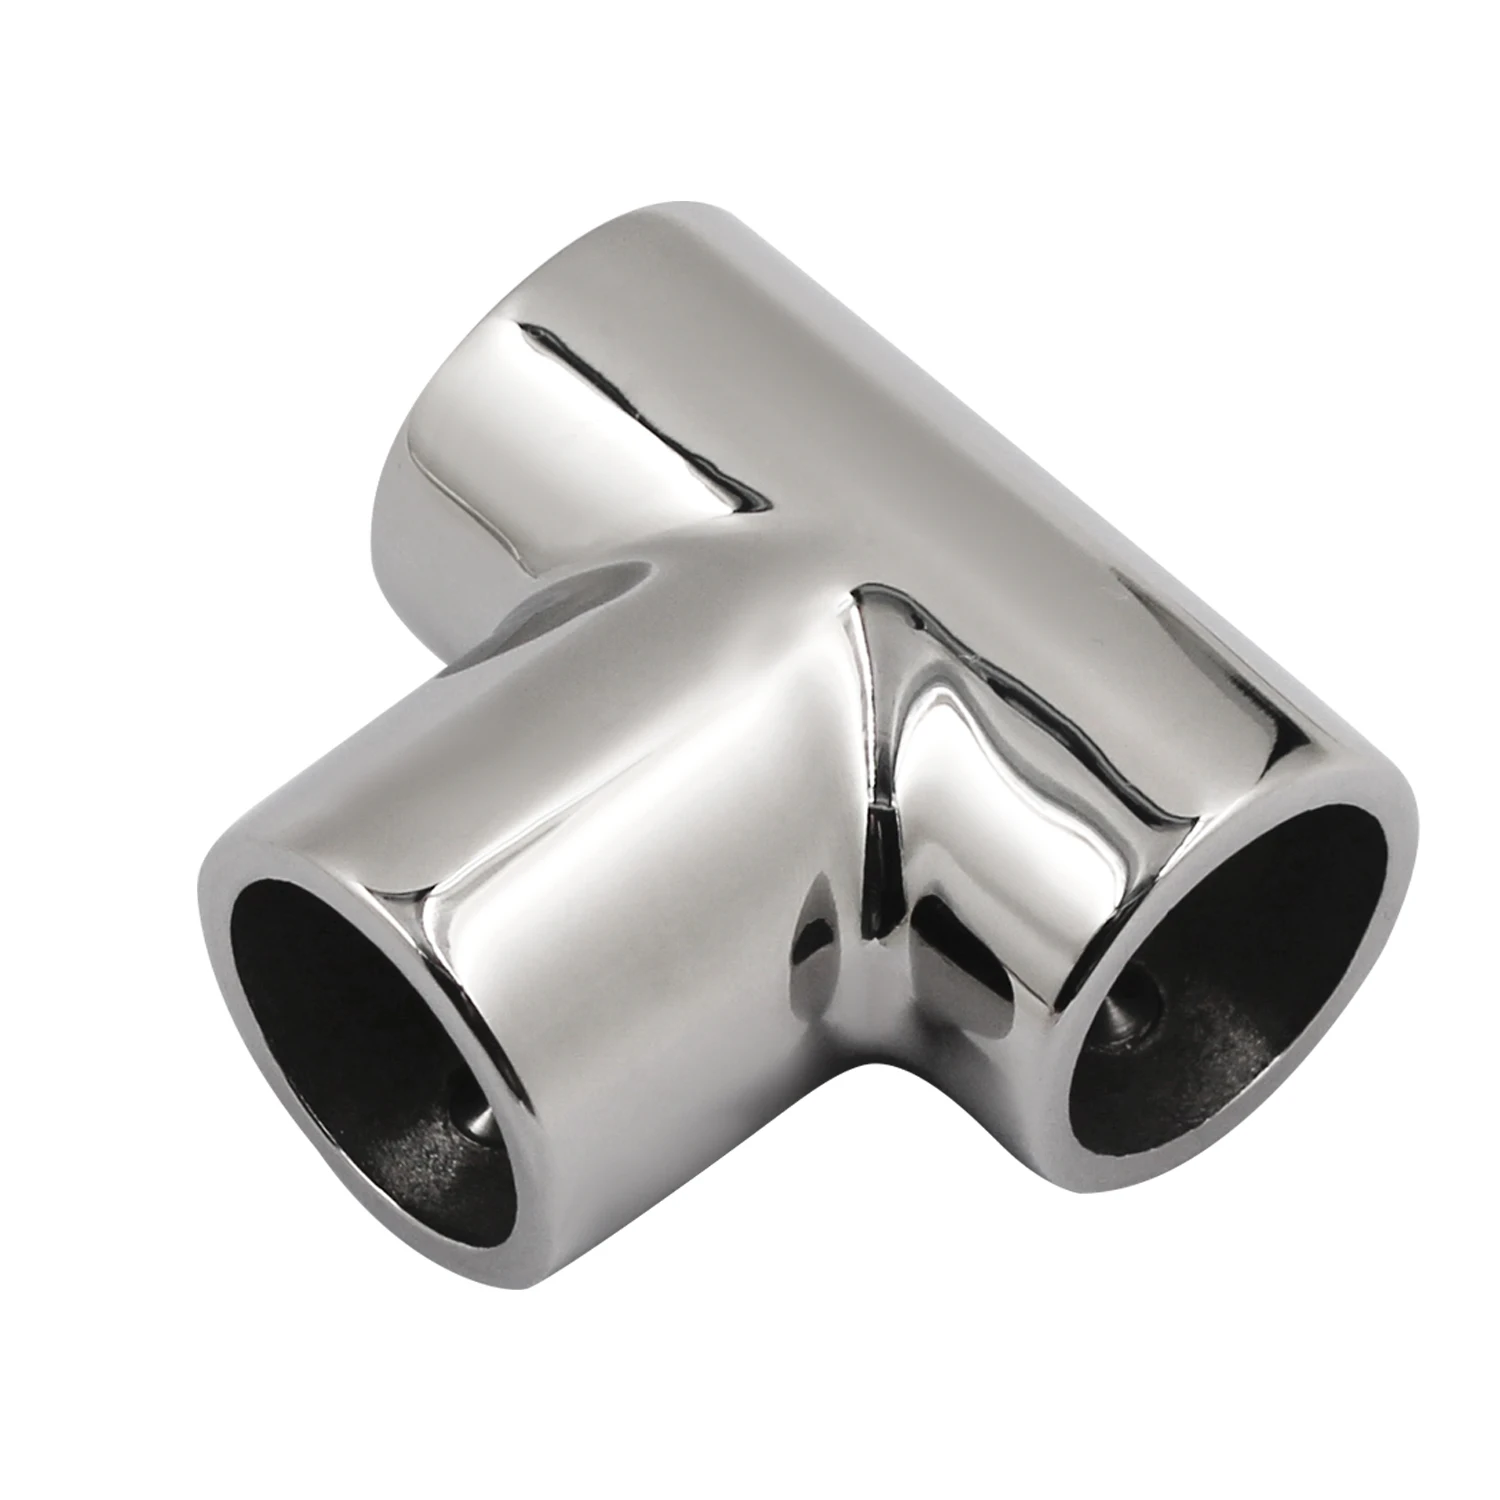 4pcs 316 Stainless Steel Boat Marine Handrail 90 Degree T/Tee Fitting Hand Rail Connector for 22mm/25mm Tube enlarge